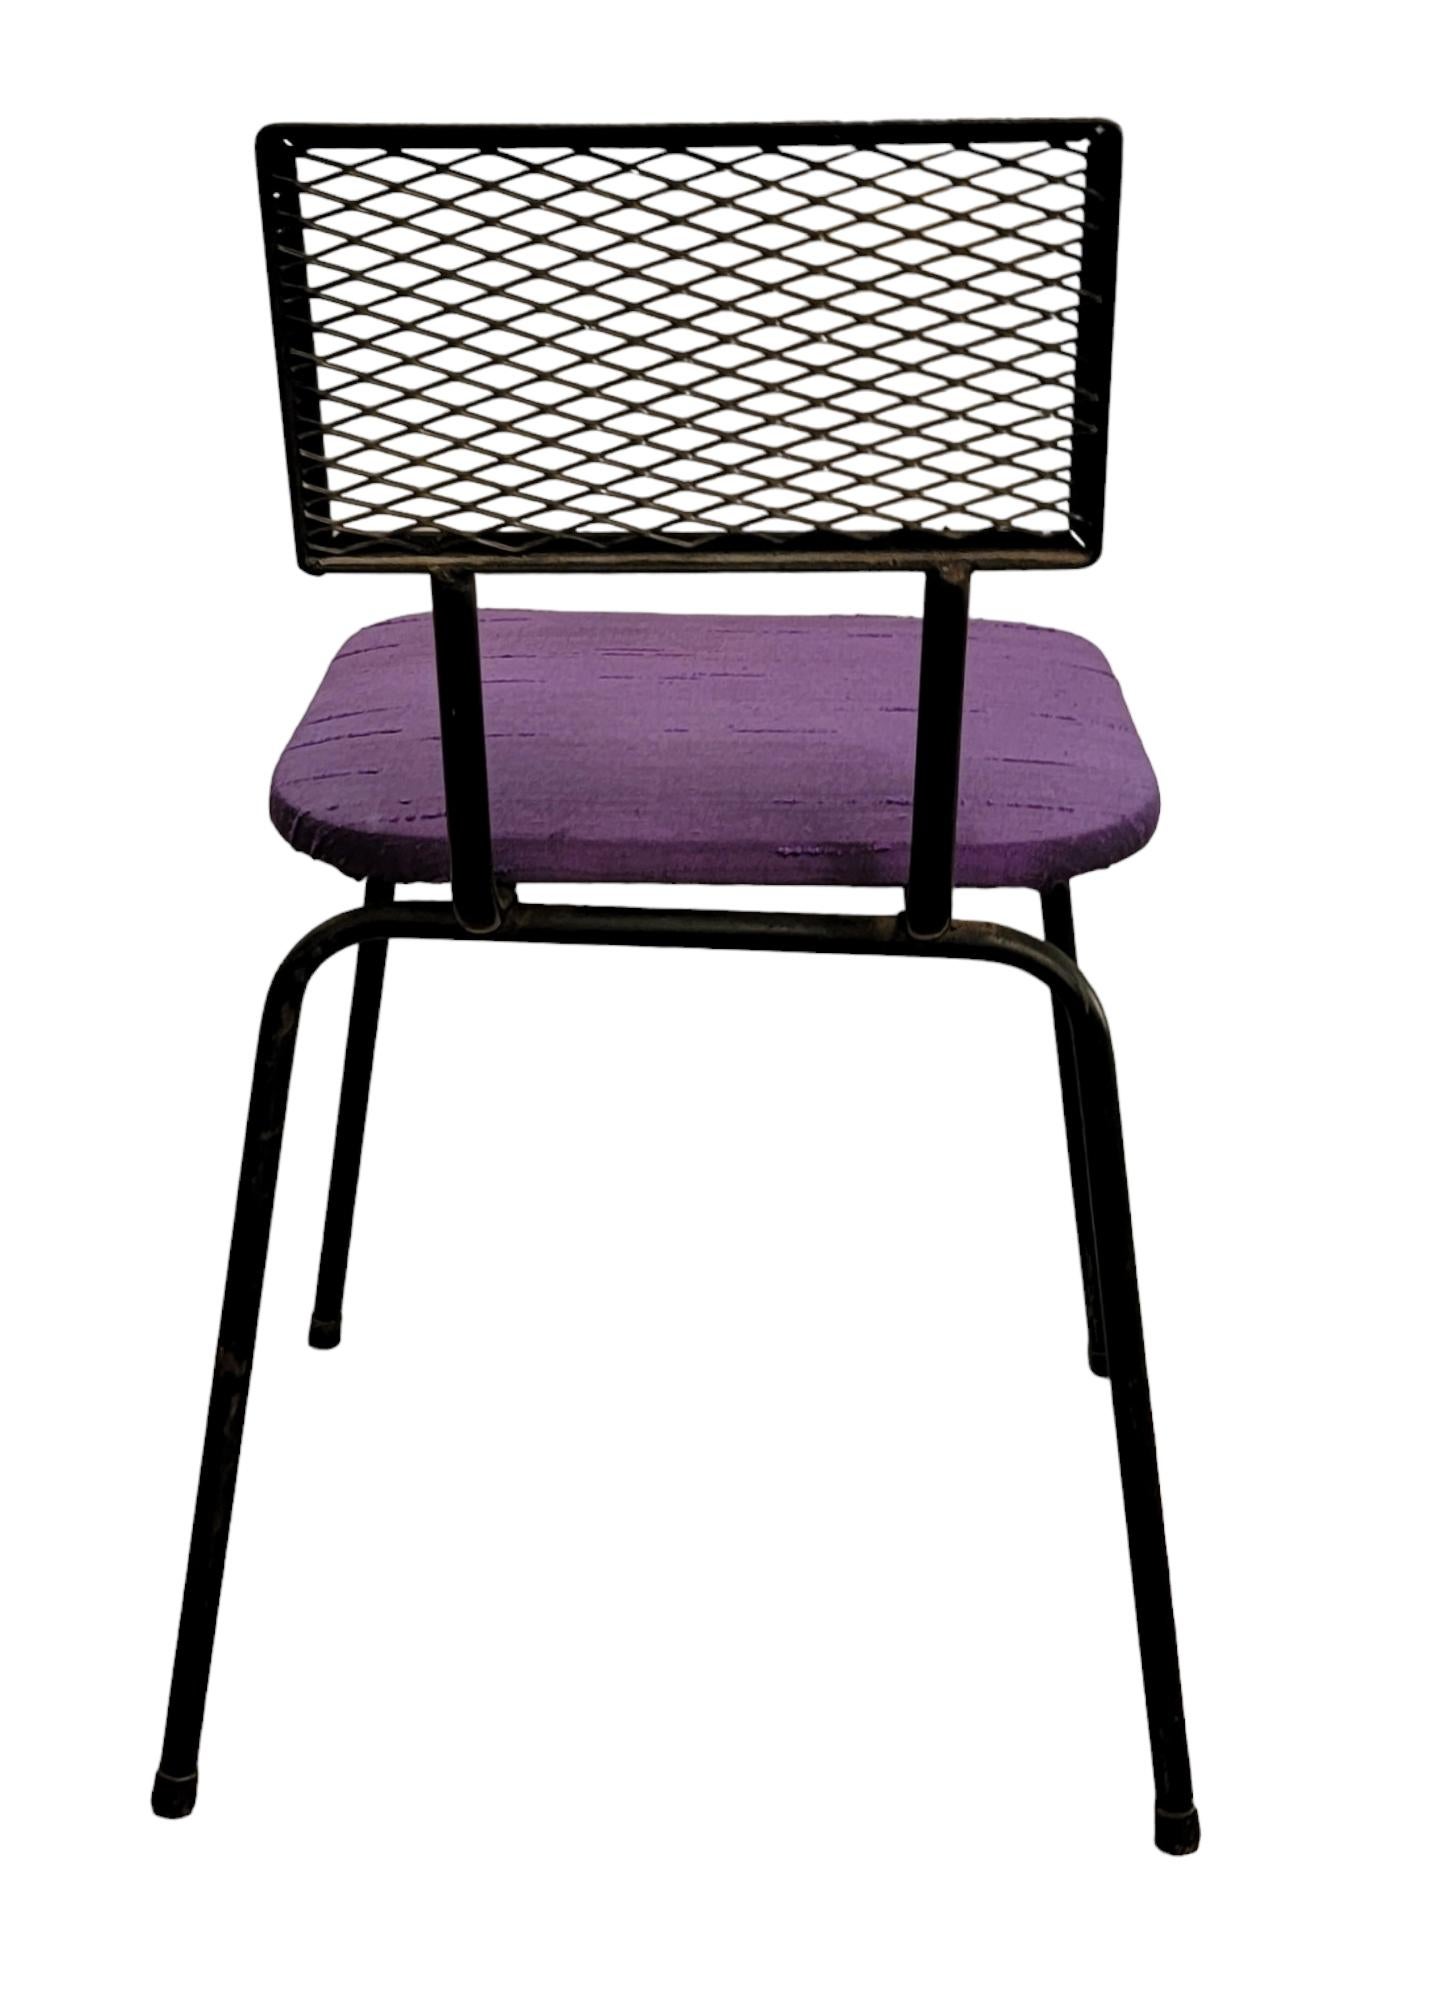 Mid Century Expanded Metal Back Chairs by Loroman. Black metal frame with purple fabric. Makers mark underneath the chair. Great side chair.